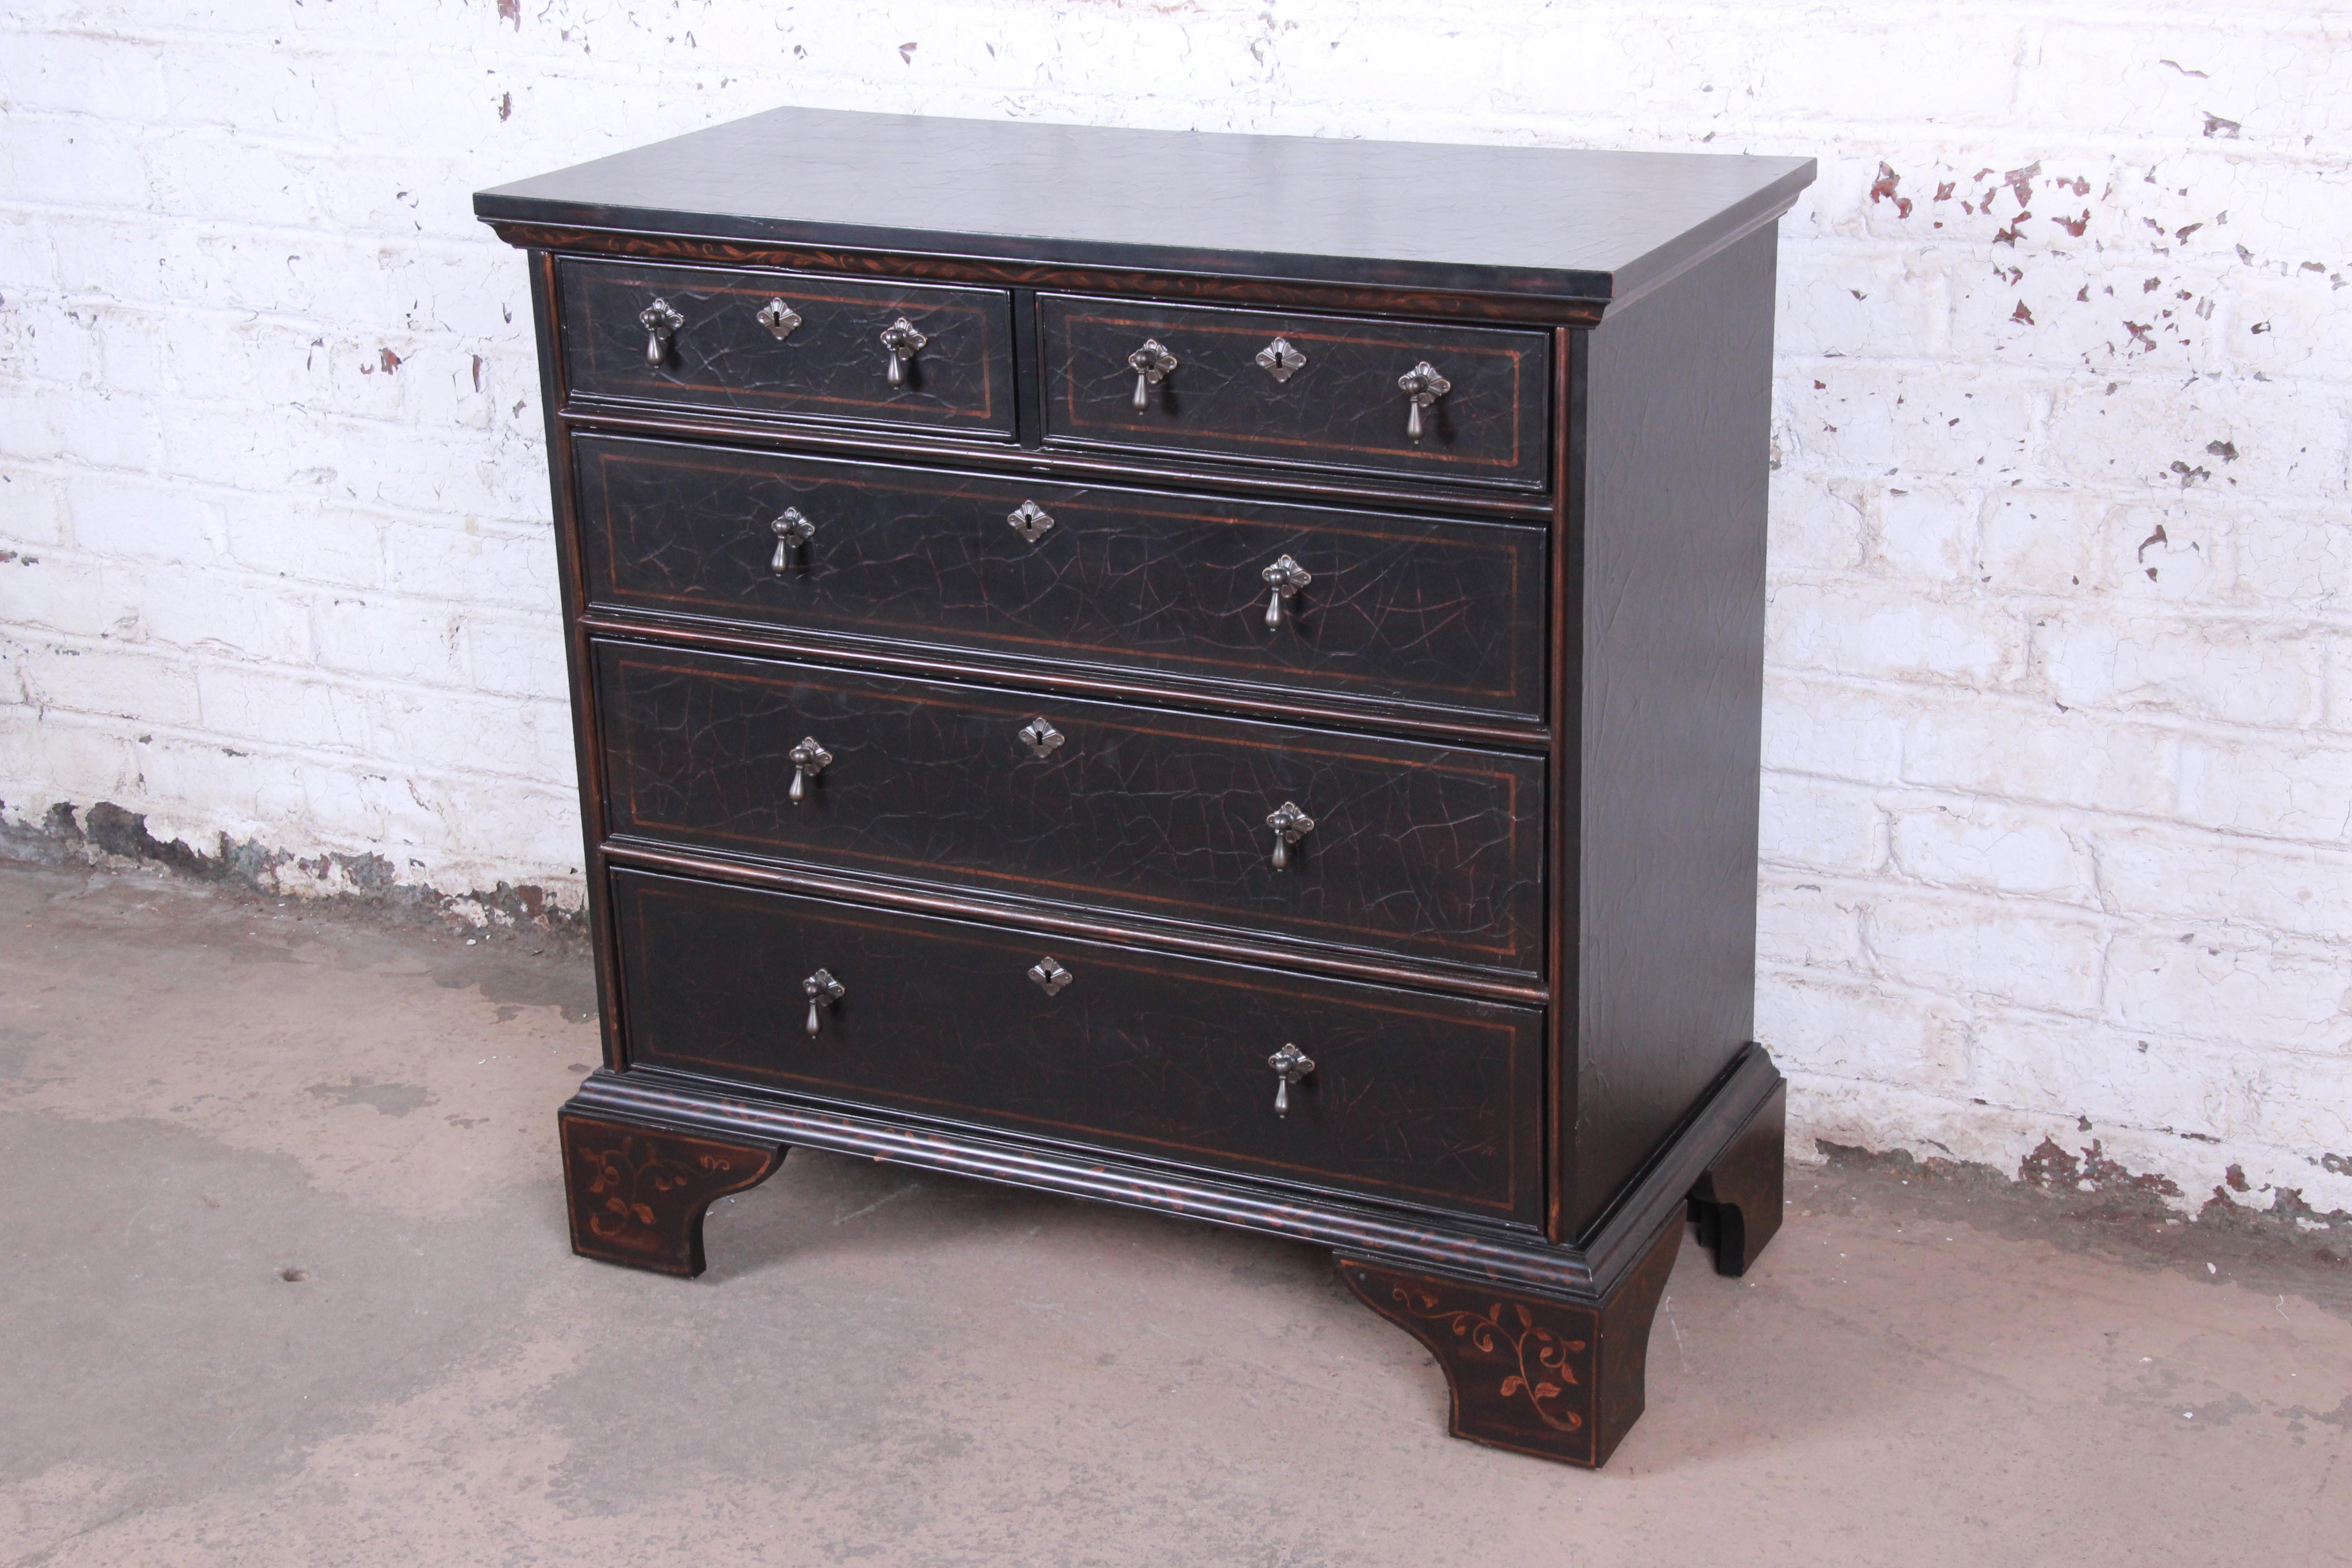 A gorgeous Italian style black lacquered dresser or chest of drawers by Baker Furniture. The chest features a unique antiqued black lacquered finish with painted floral details. It offers ample storage, with five dovetailed drawers. The original